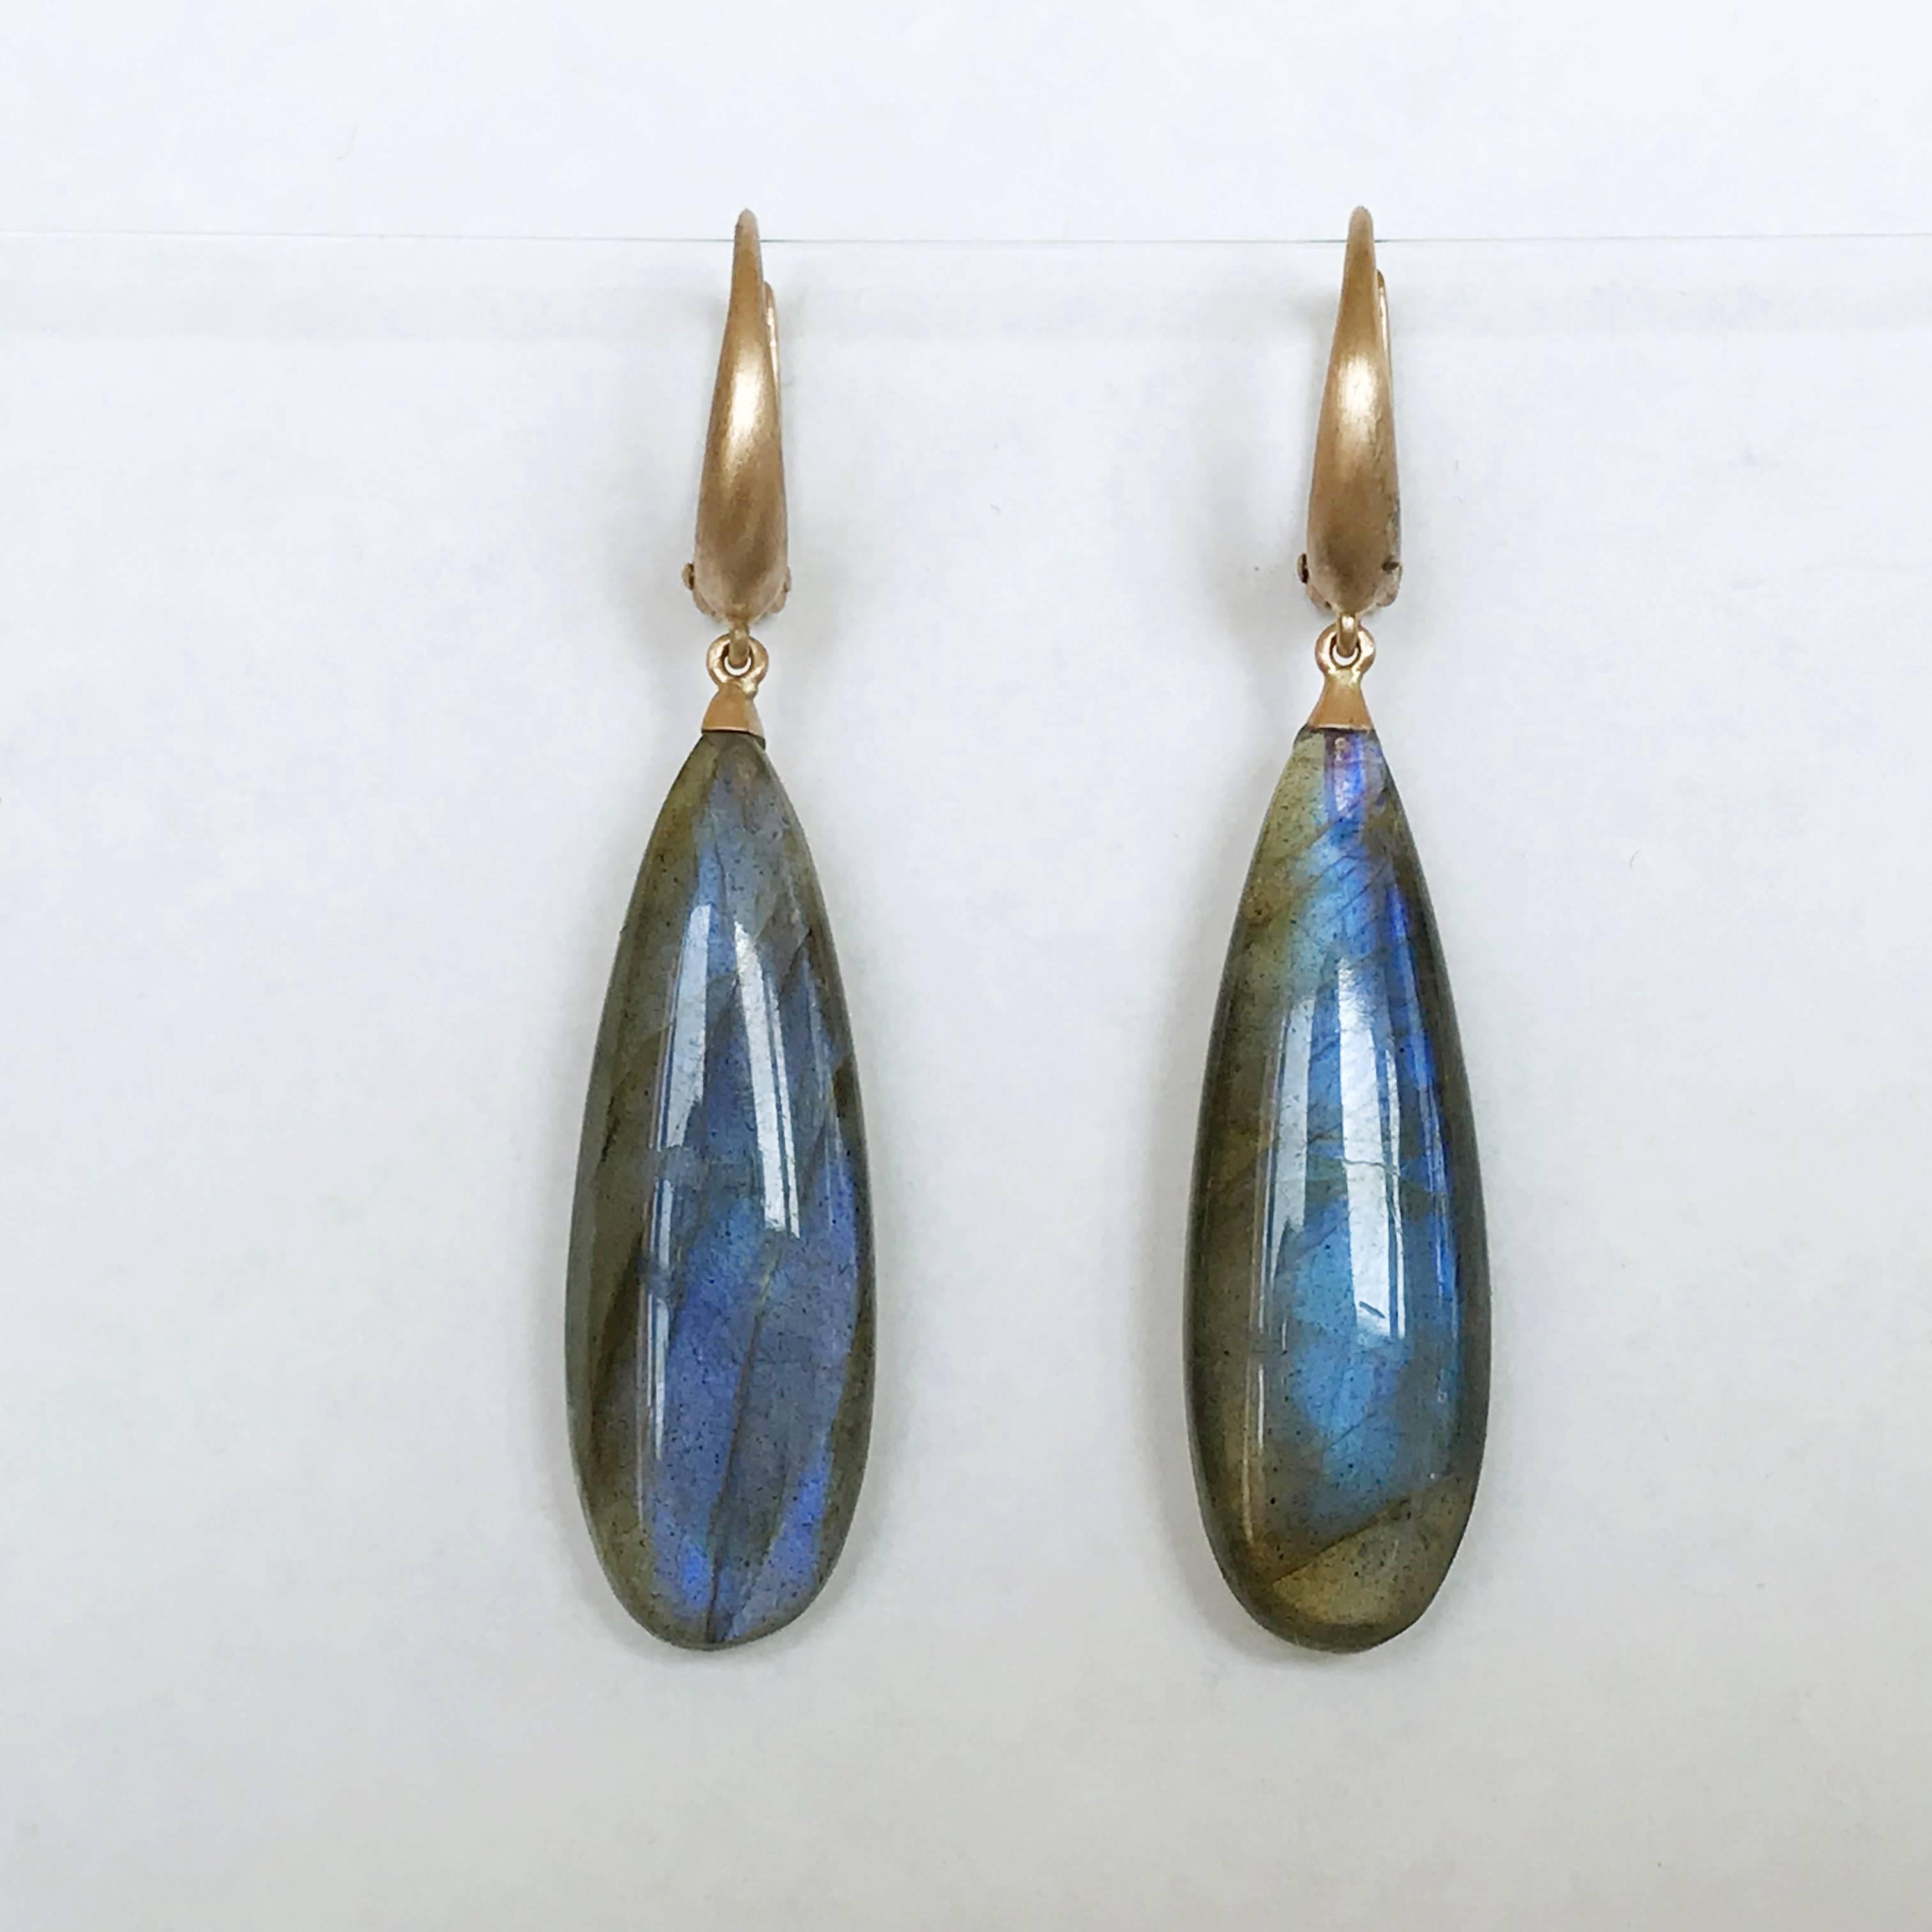 Dalben design 18 kt satin finished rose gold earrings with two drop shape grey-brown with blue flash Labradorite 10 x 30 mm . 
Earring dimension : 
width 10 mm 
height with leverback 47 mm 
The earrings has been designed and handcrafted in our